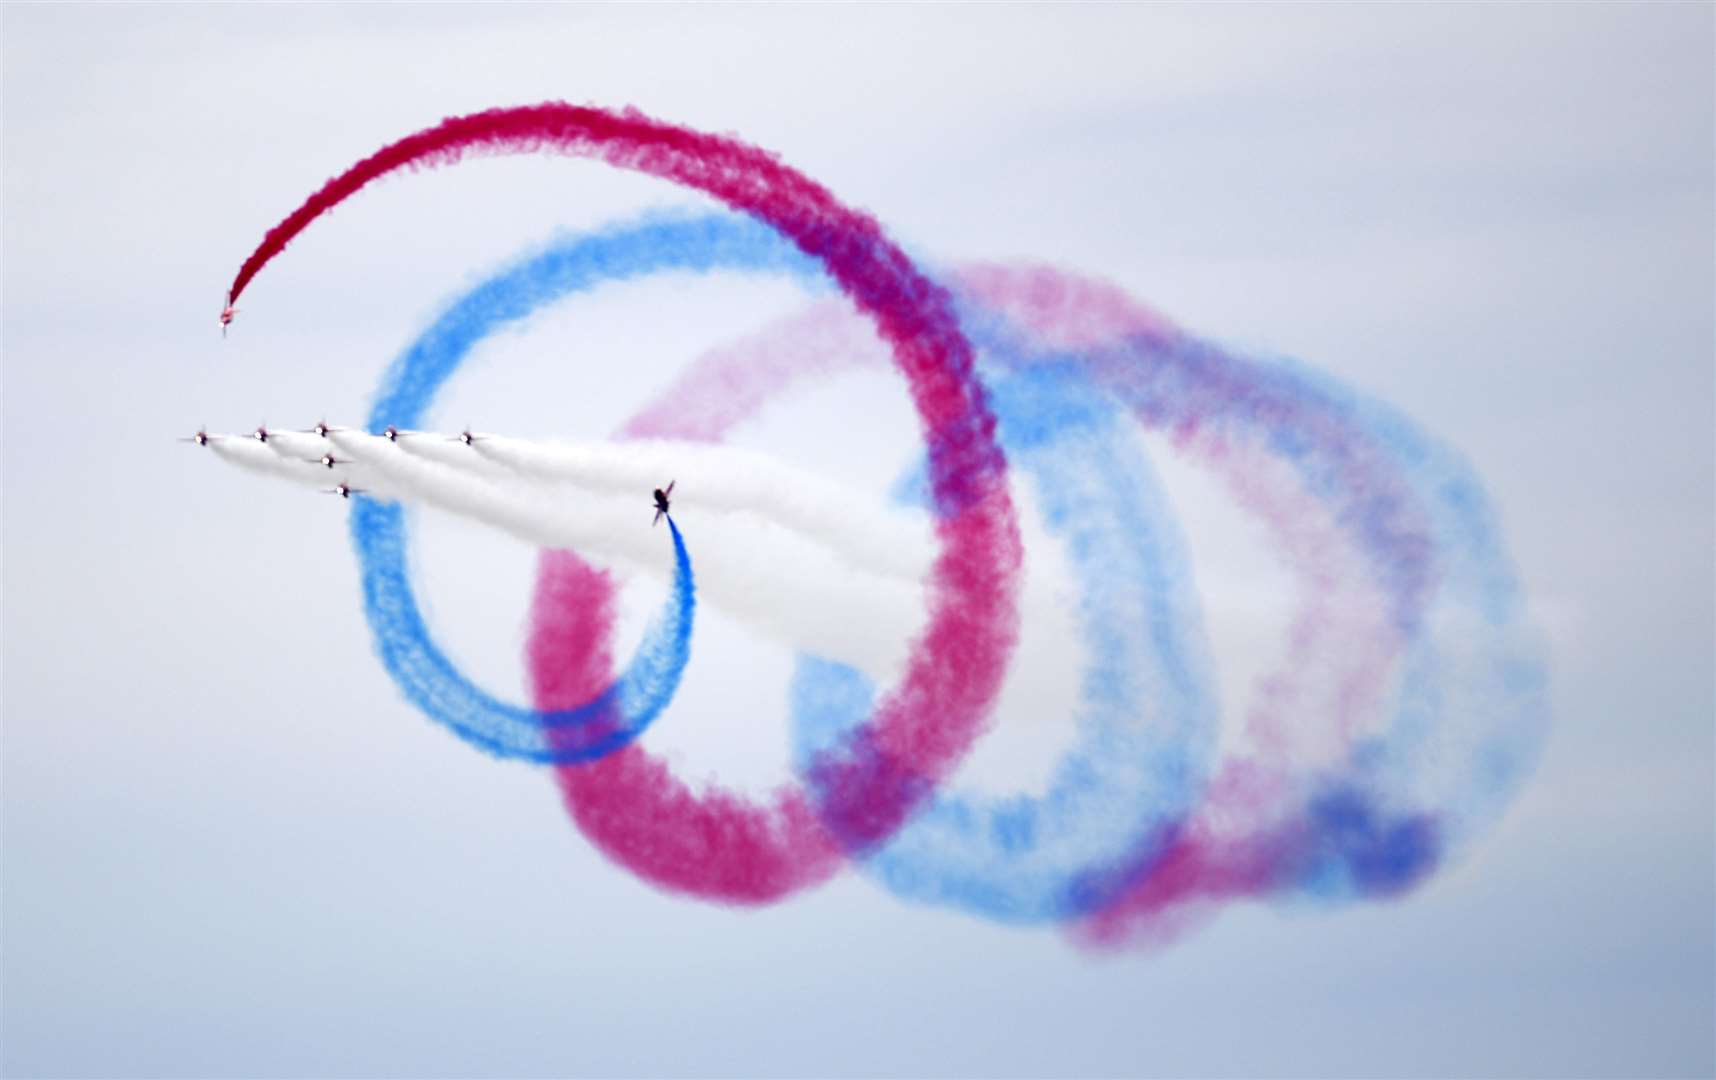 The Red Arrows are coming to Folkestone